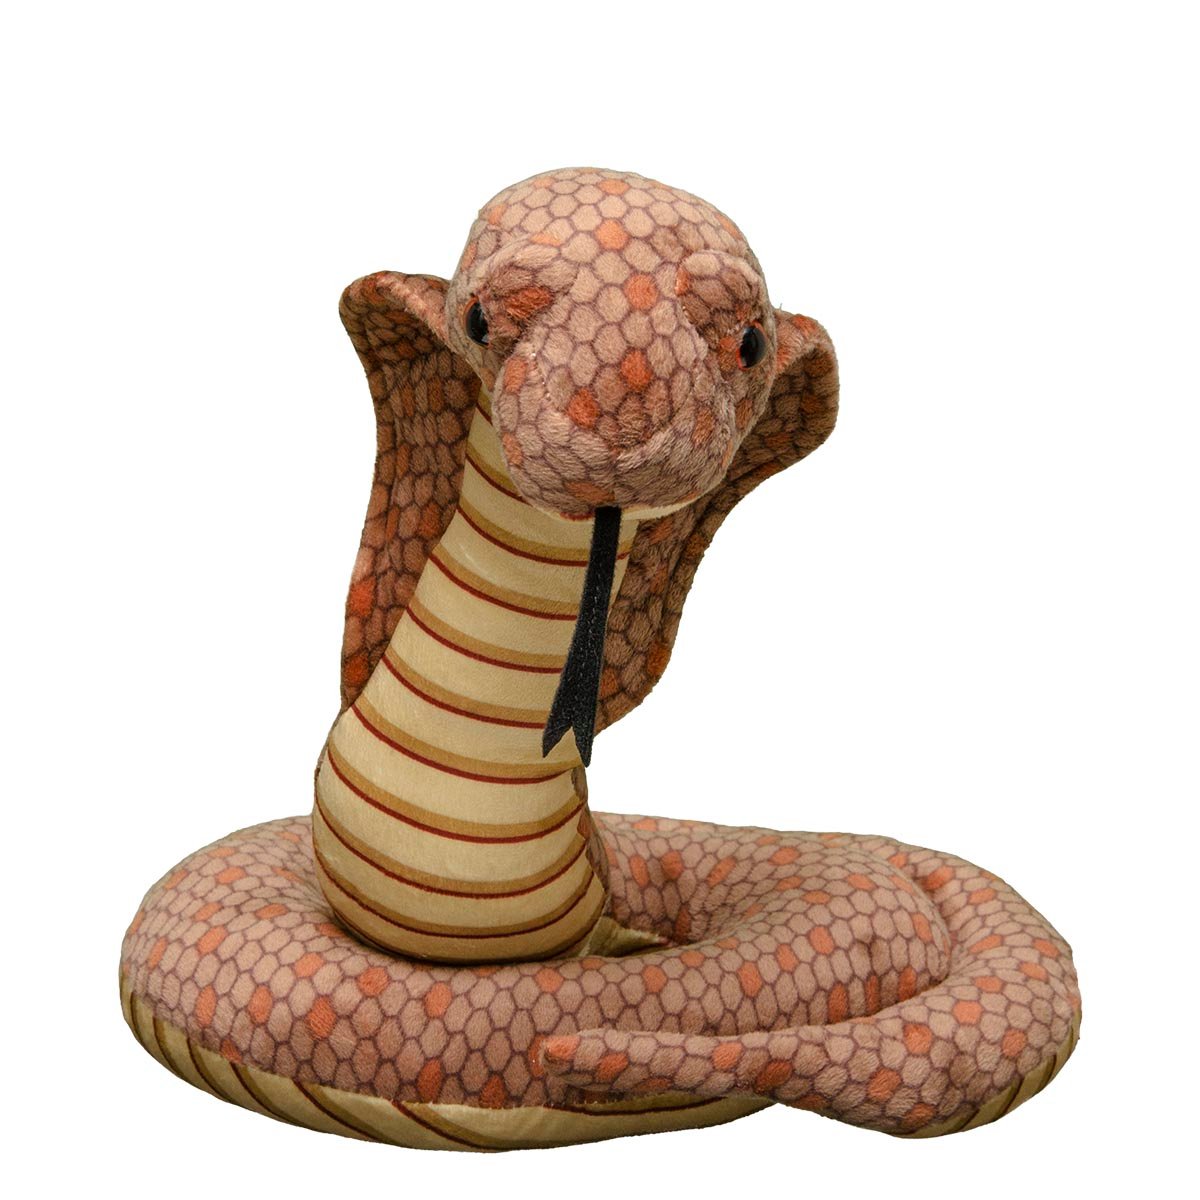 King Cobra Photos, Images and Pictures